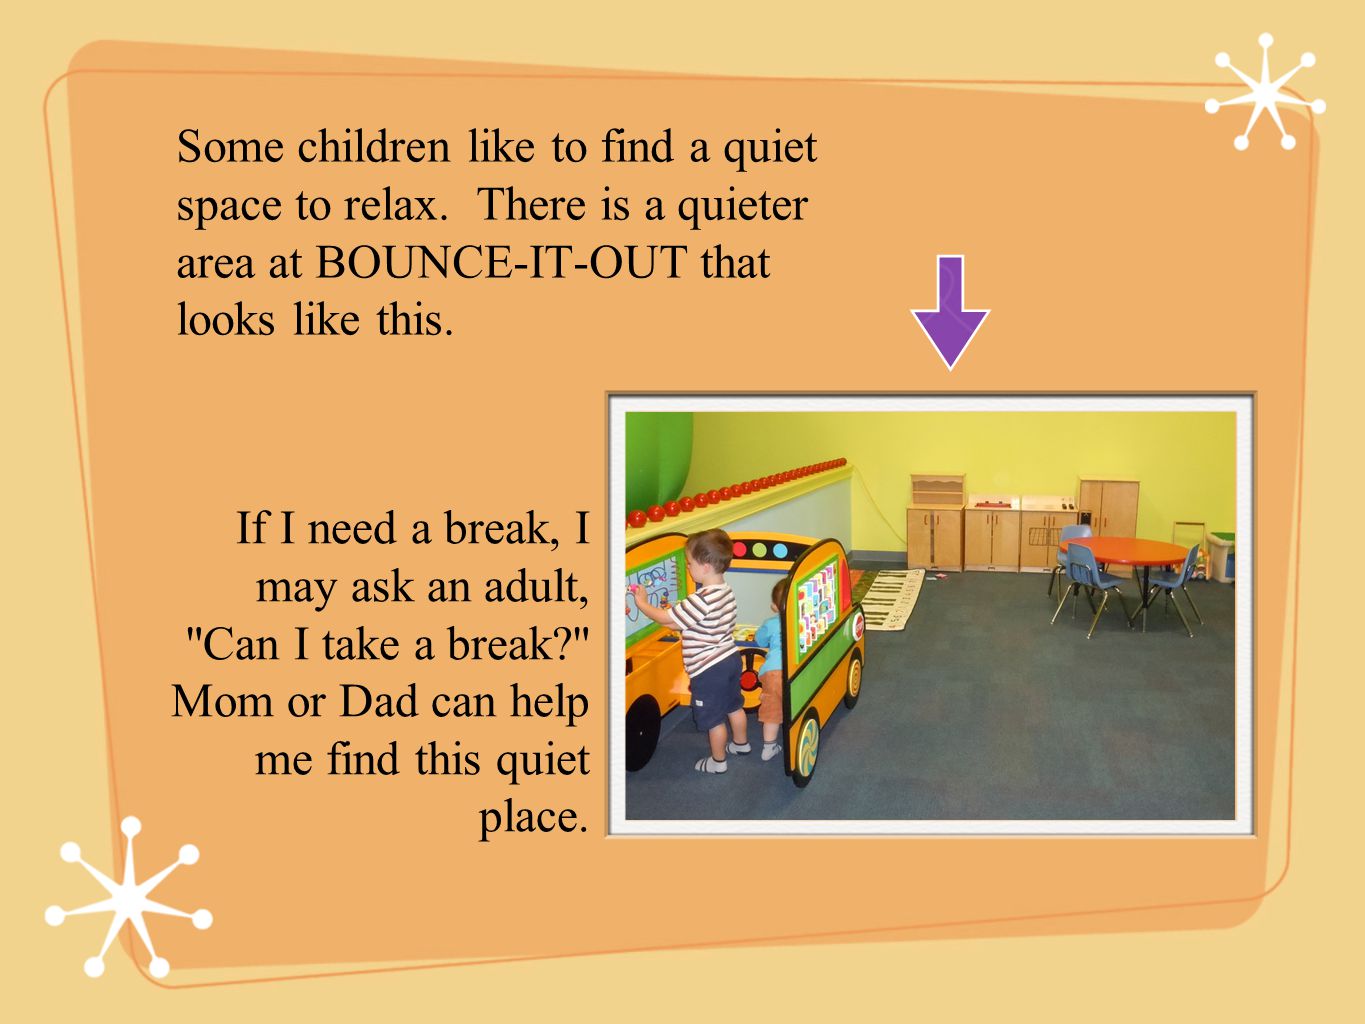 Some children like to find a quiet space to relax.